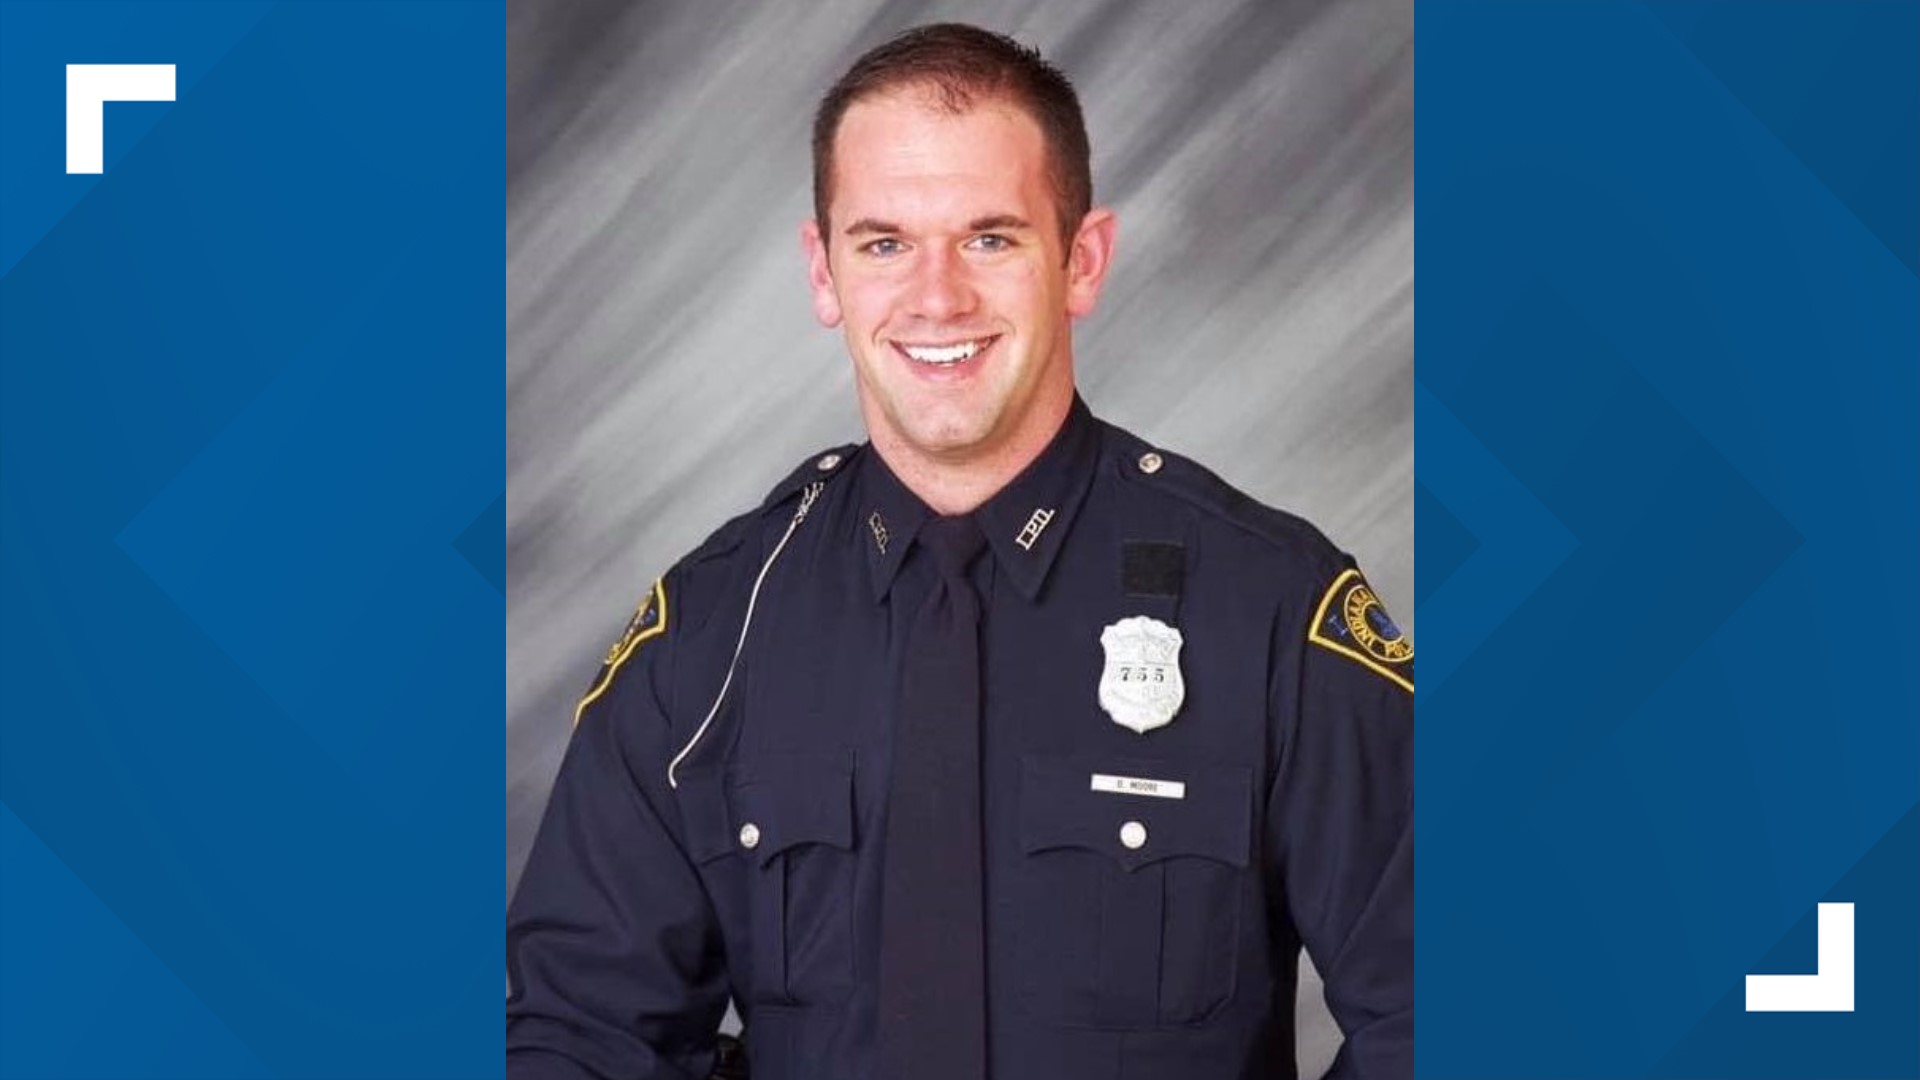 Officer David Moore was shot the morning of Jan. 23, 2011 and died three days later.